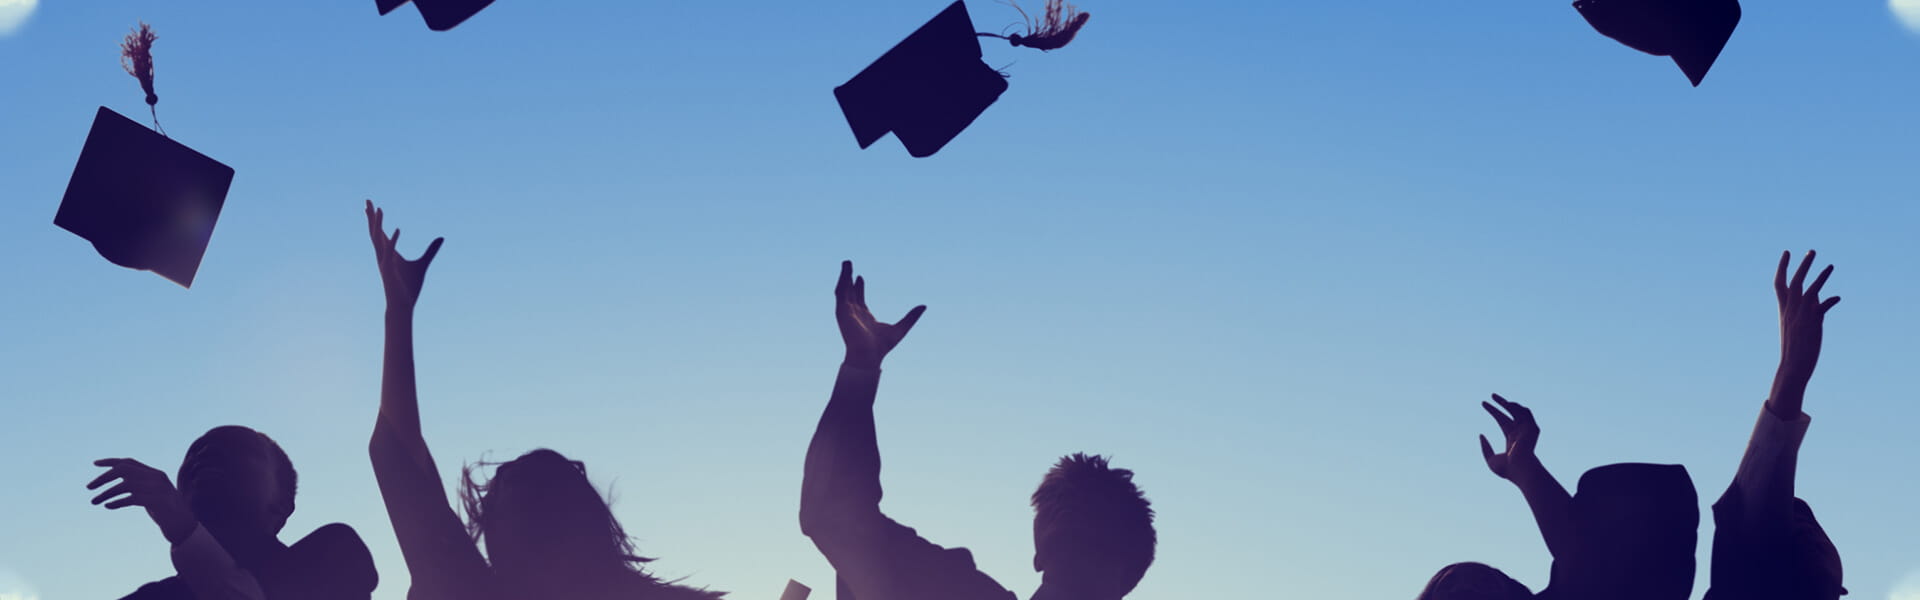 Graduates throwing their mortarboards into the sky.